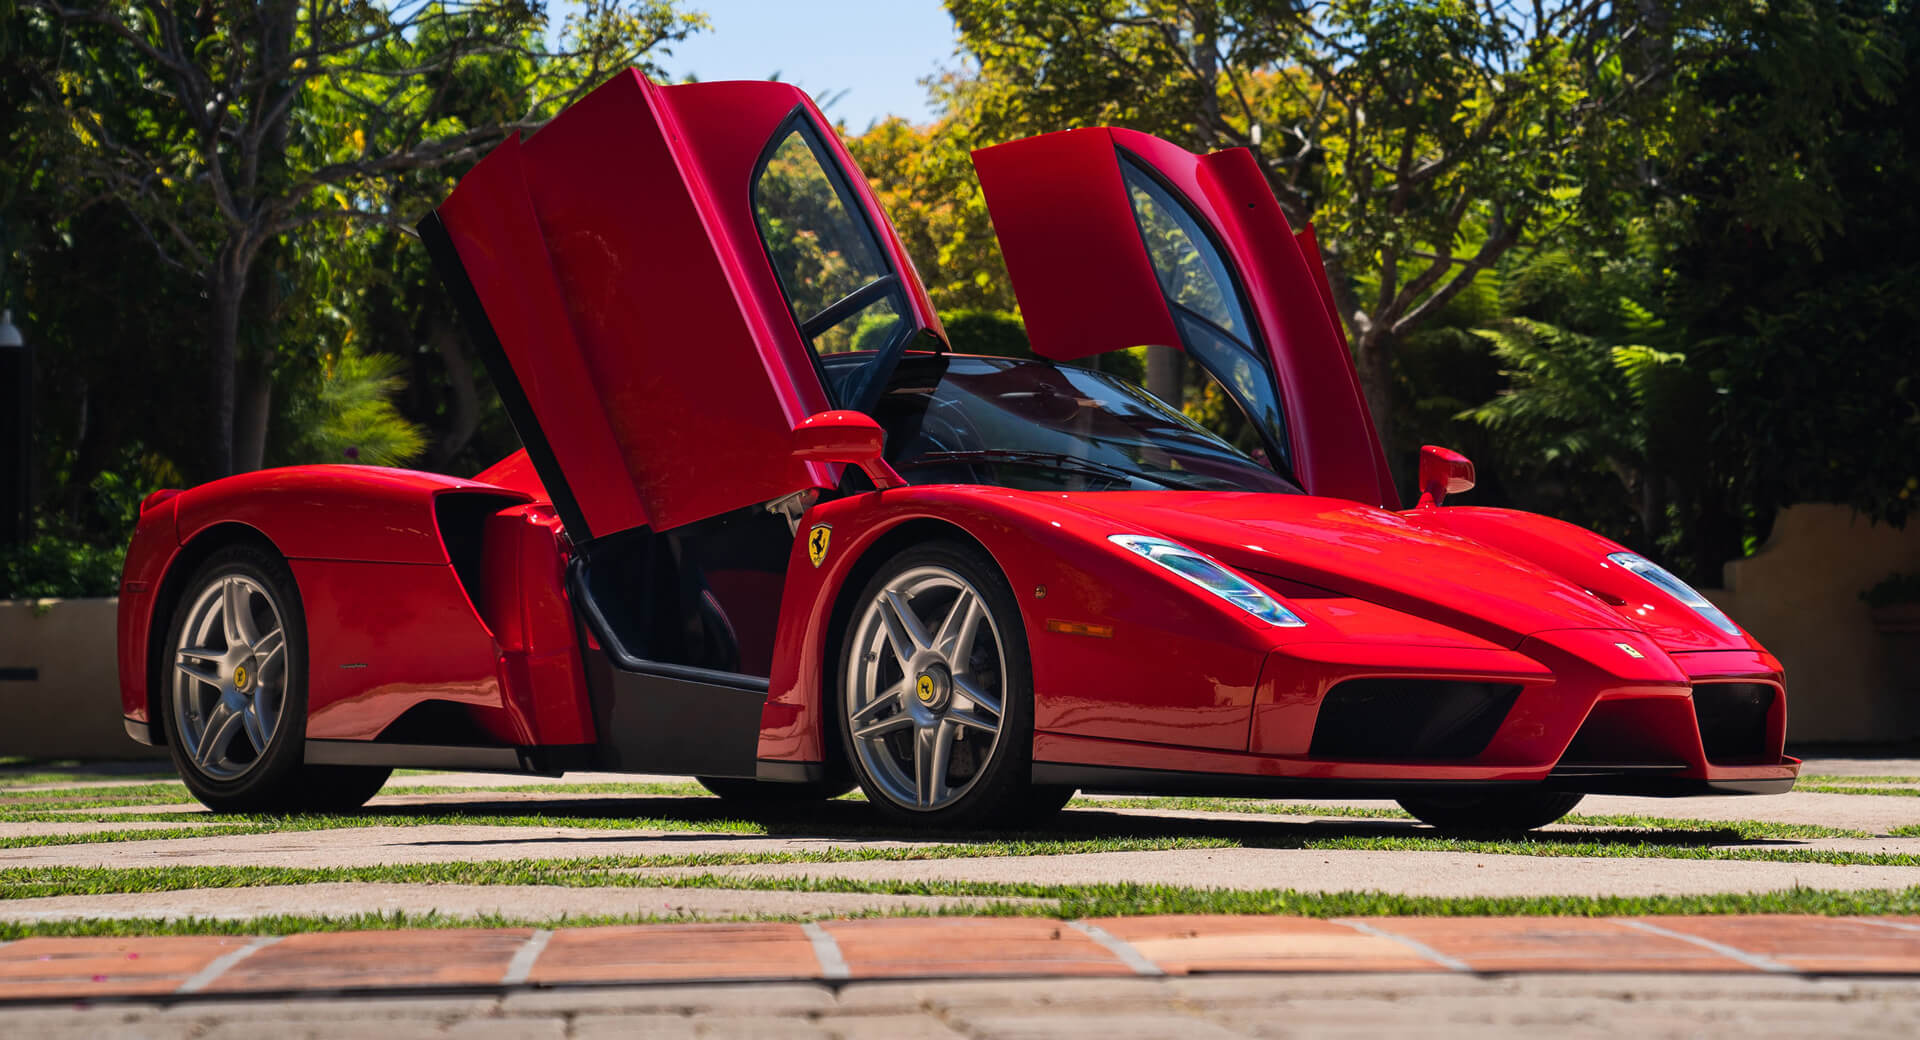 Ferrari Enzo Sets Record For The Most Expensive Car Sold In Online-Only Auction | Carscoops